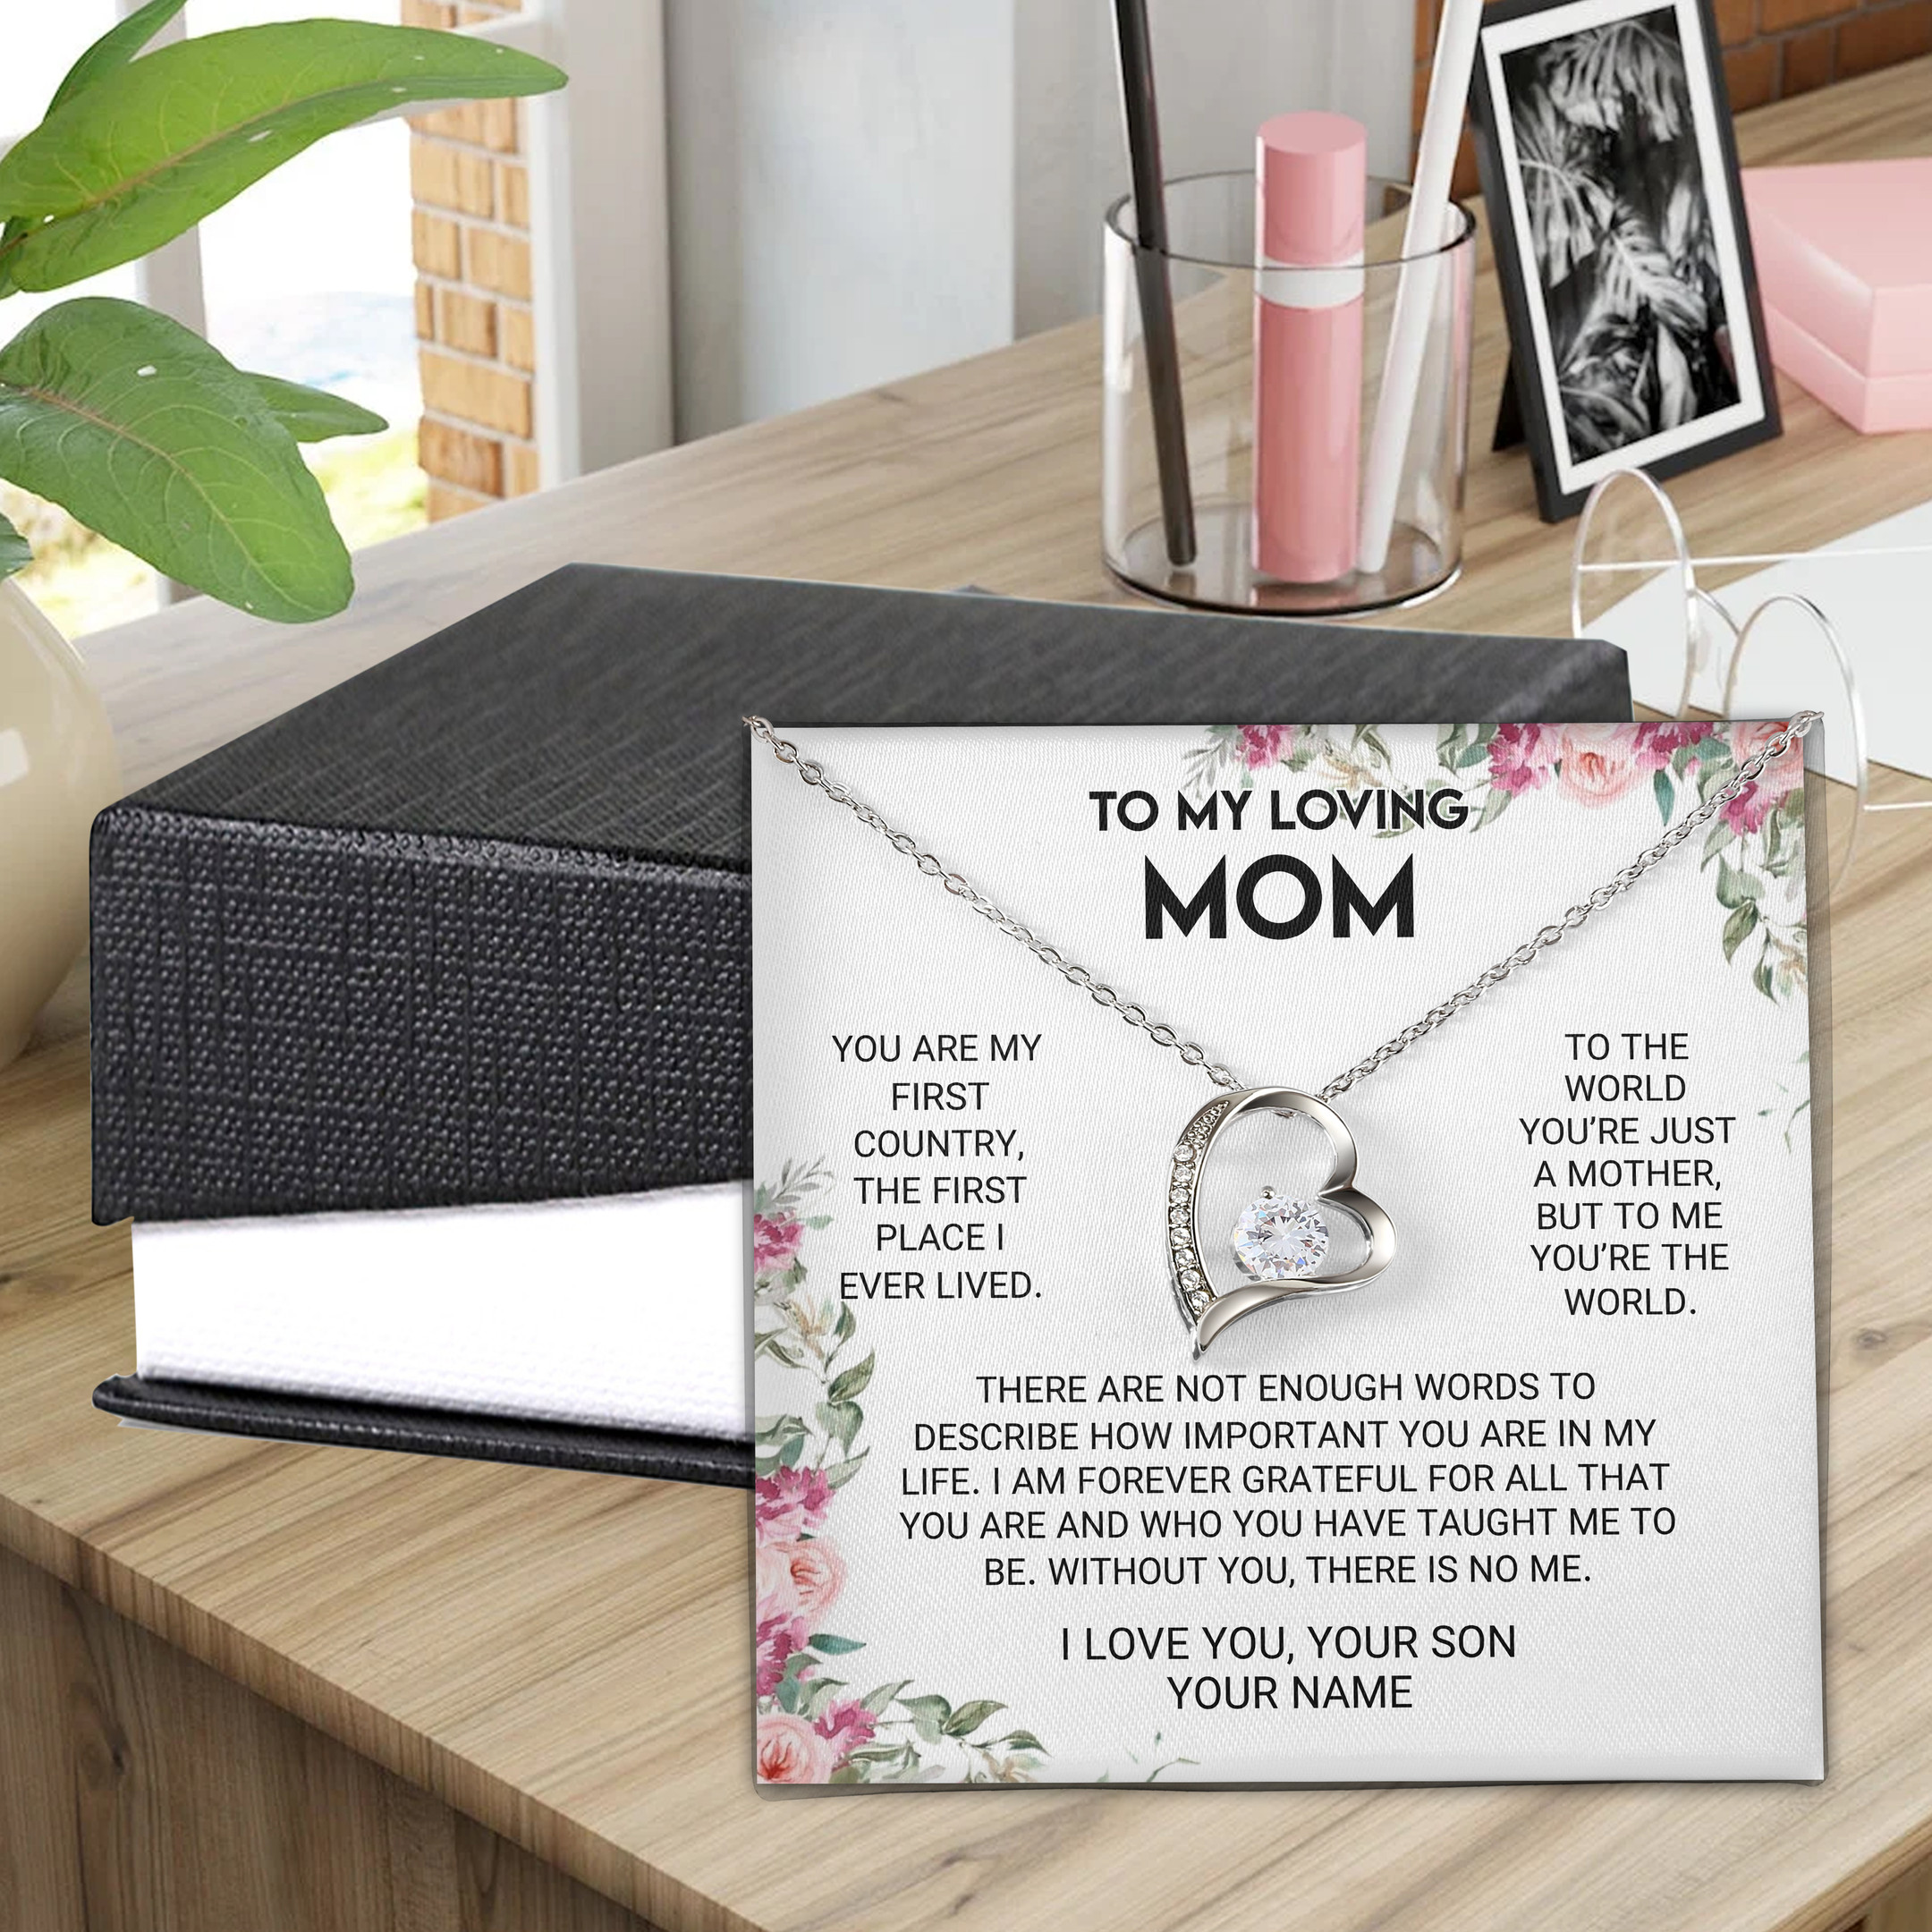 Mother's Day Gift Ideas To My Loving Mom